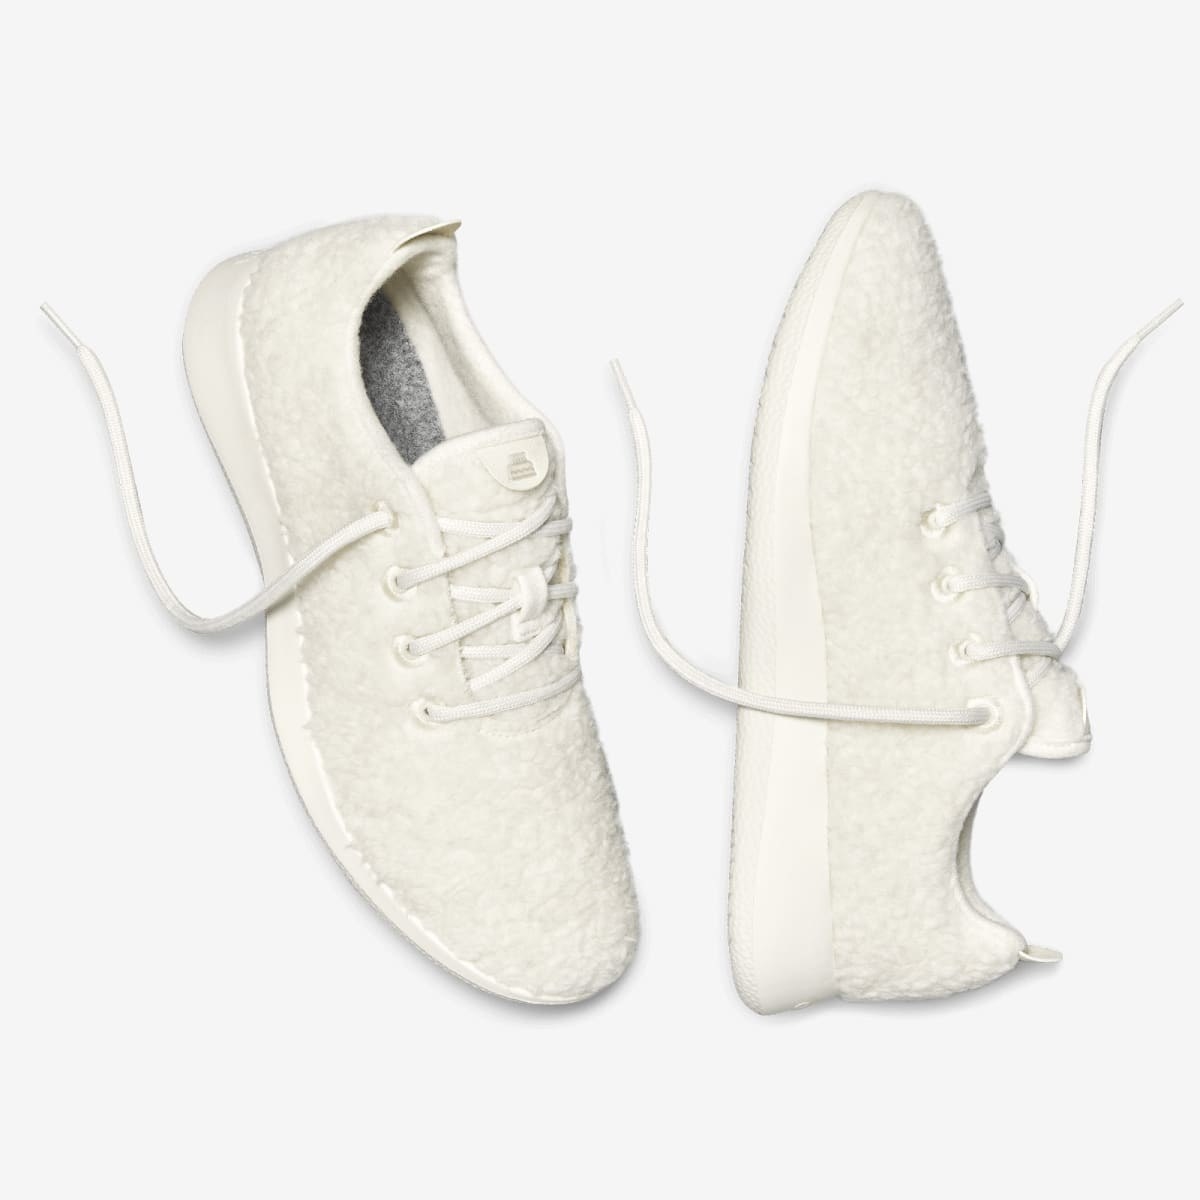 The cream, fluffy exterior lace-up sneakers